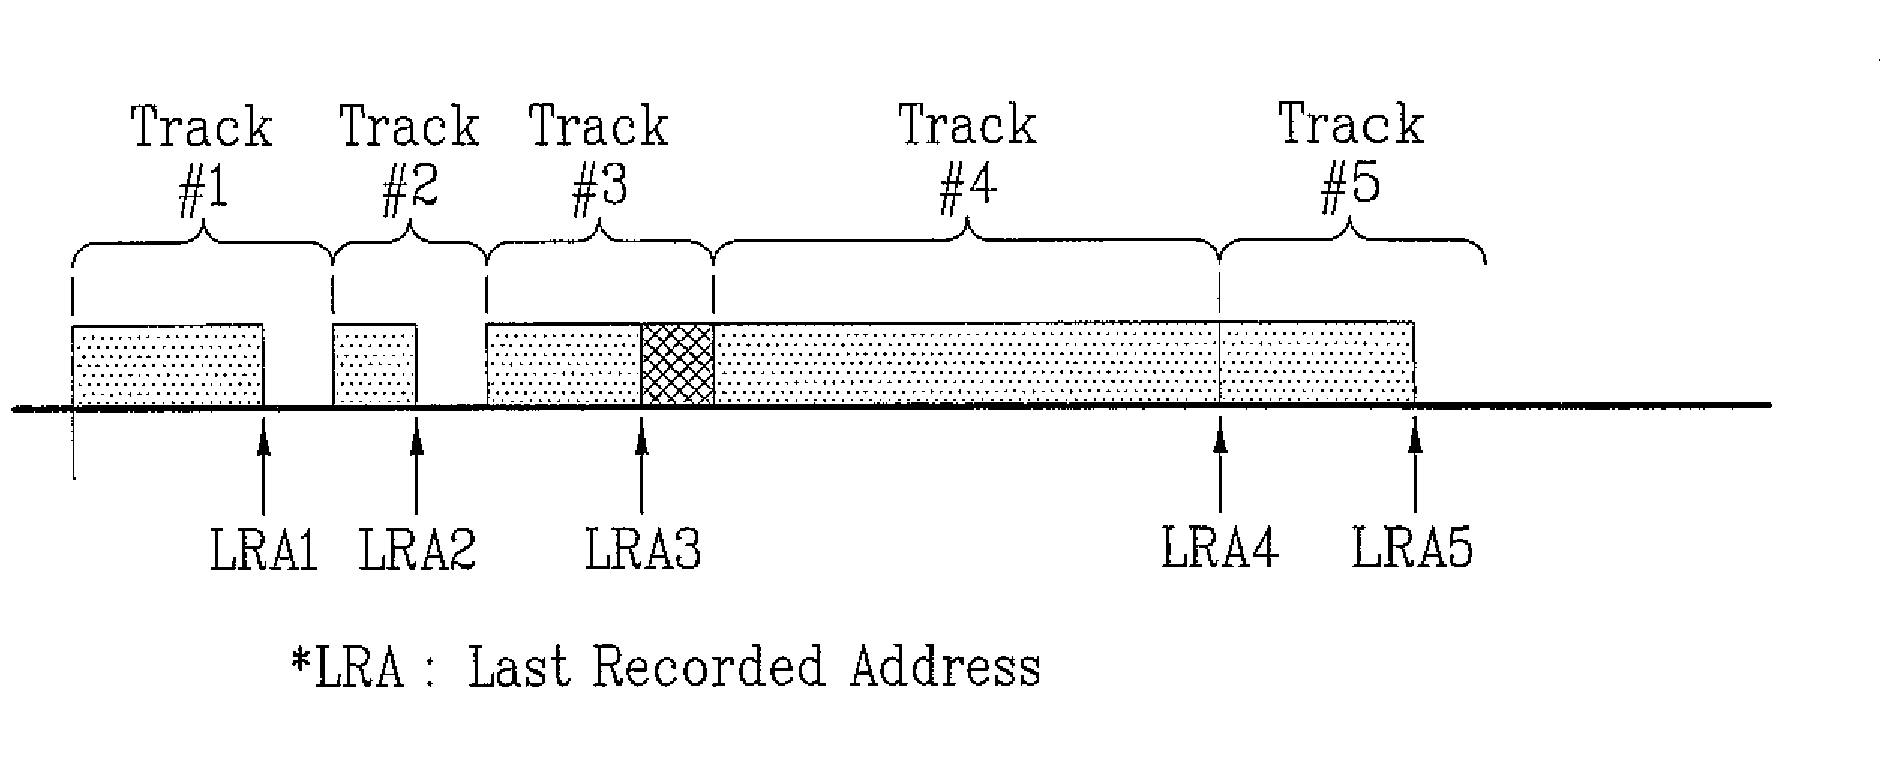 Write-once optical disc, and method and apparatus for recording management information thereon